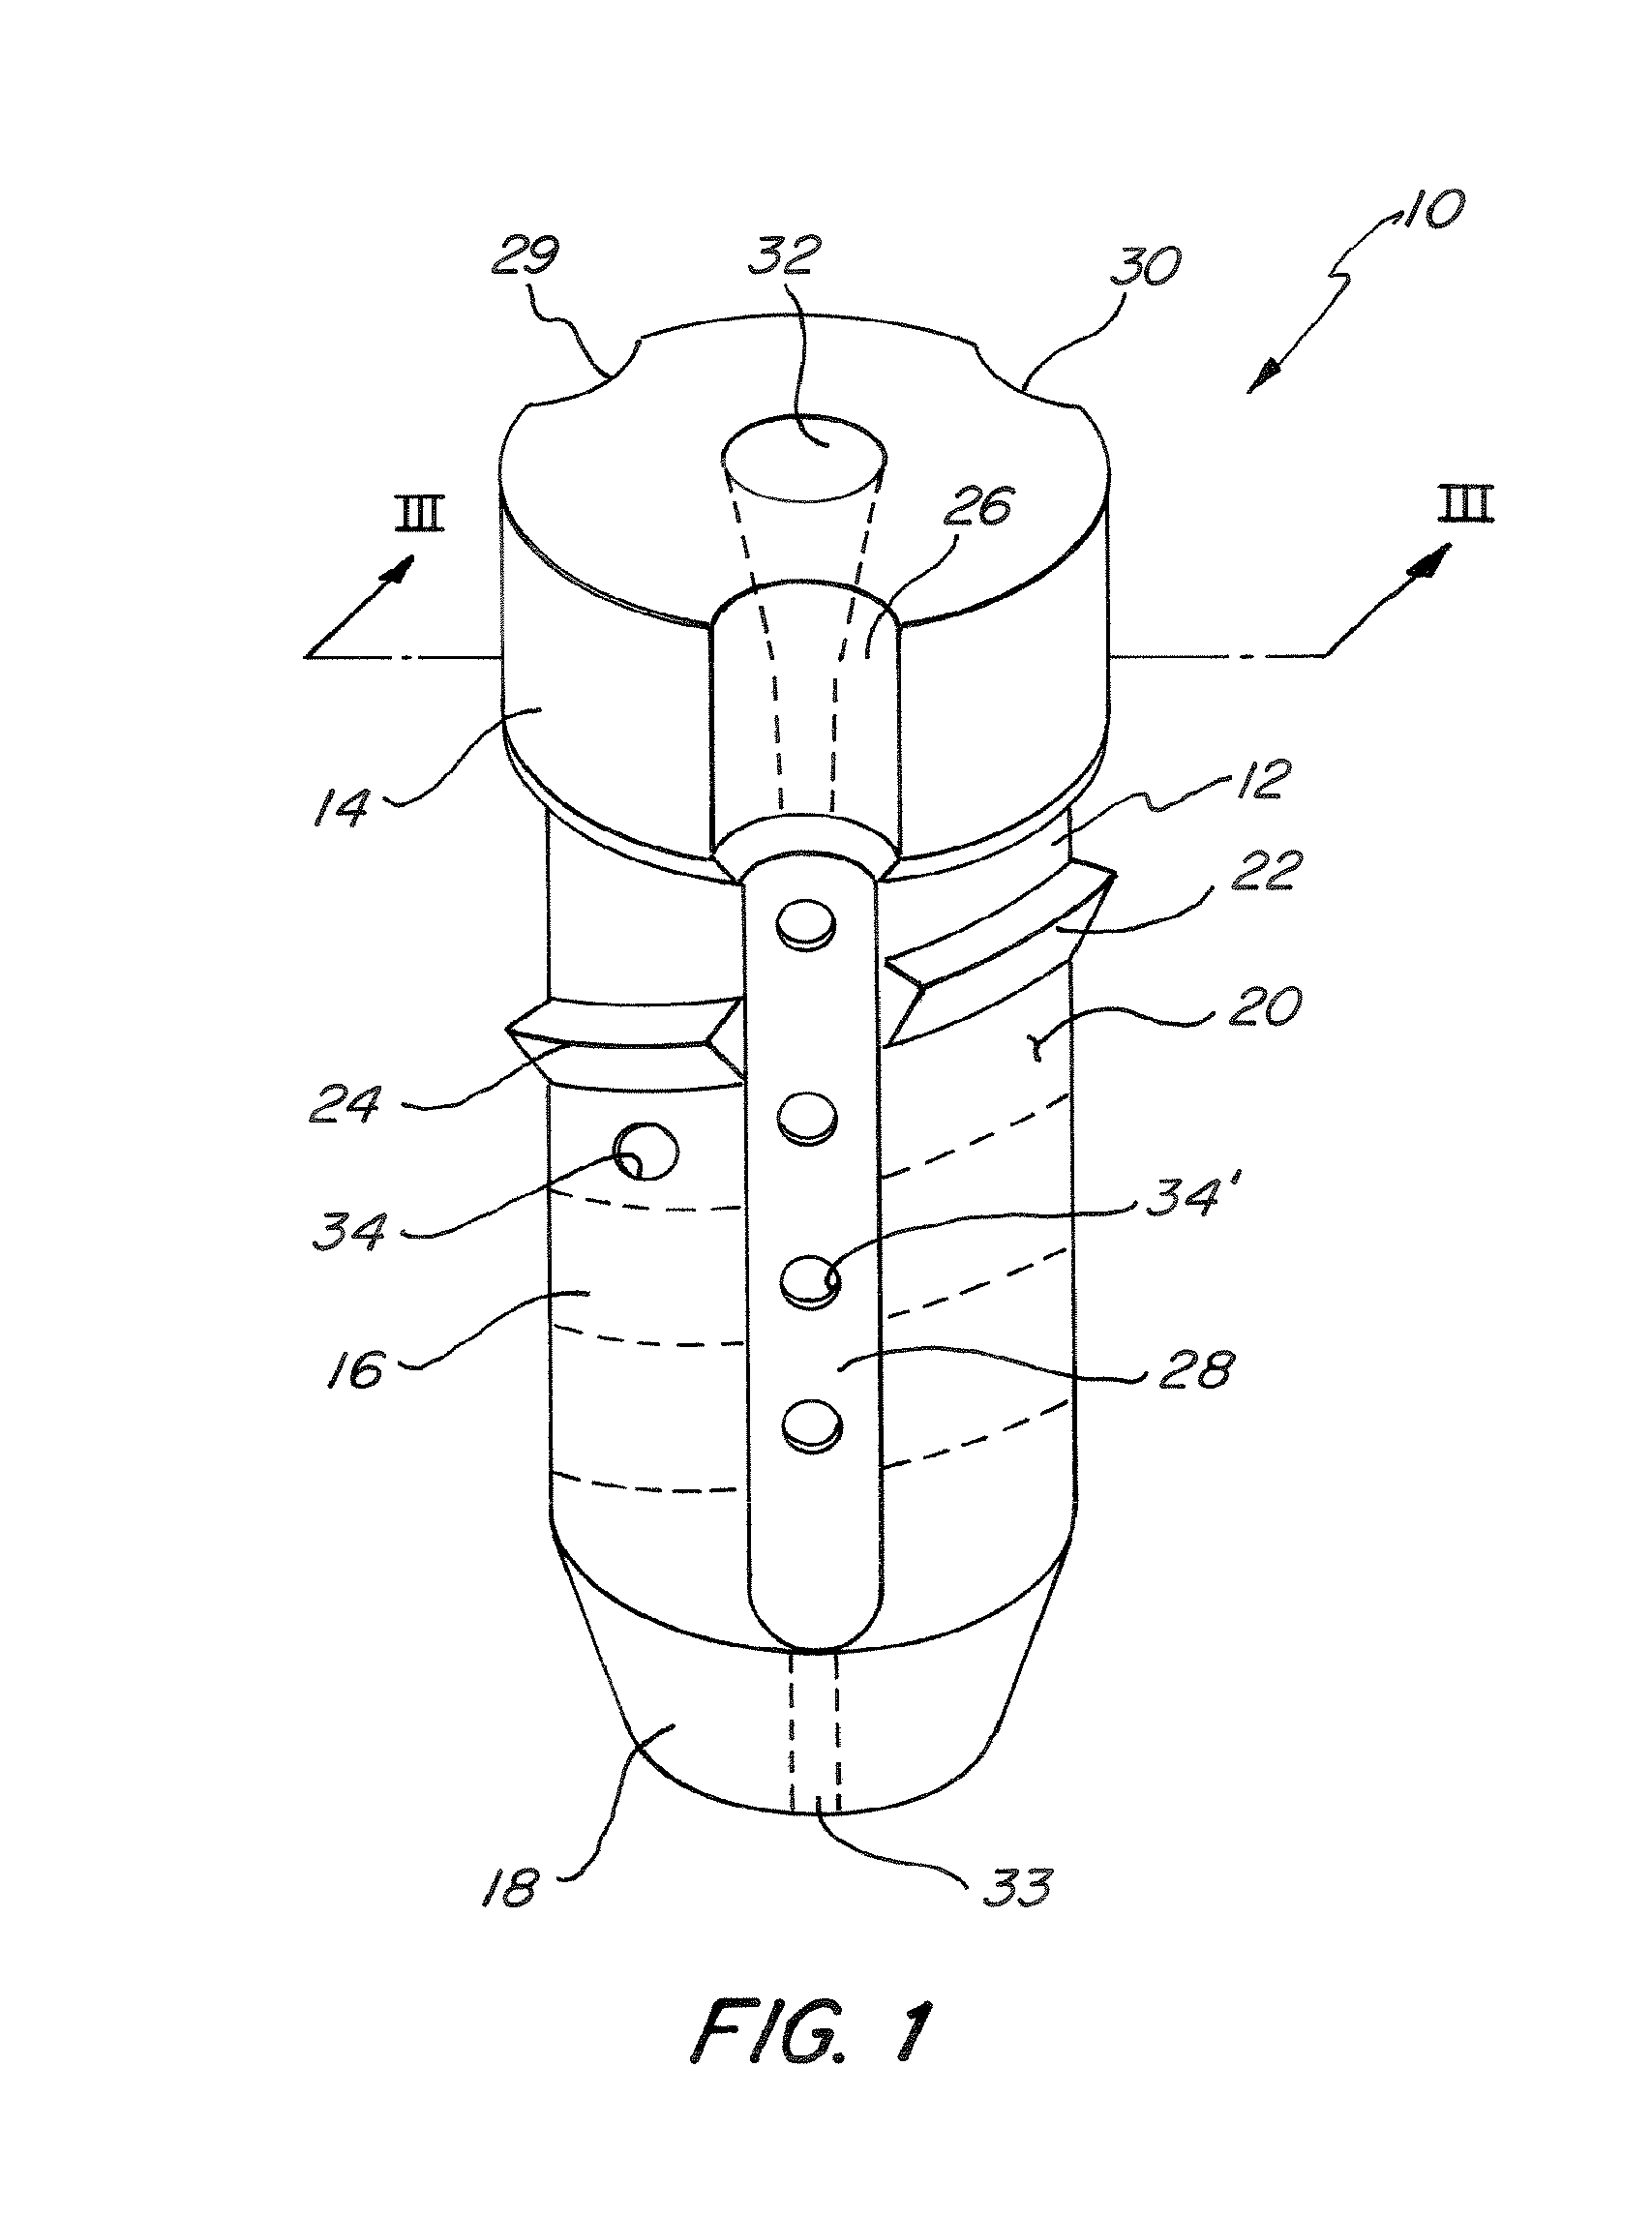 Biodegradable interference screw and tool for attaching a transplant to a bone